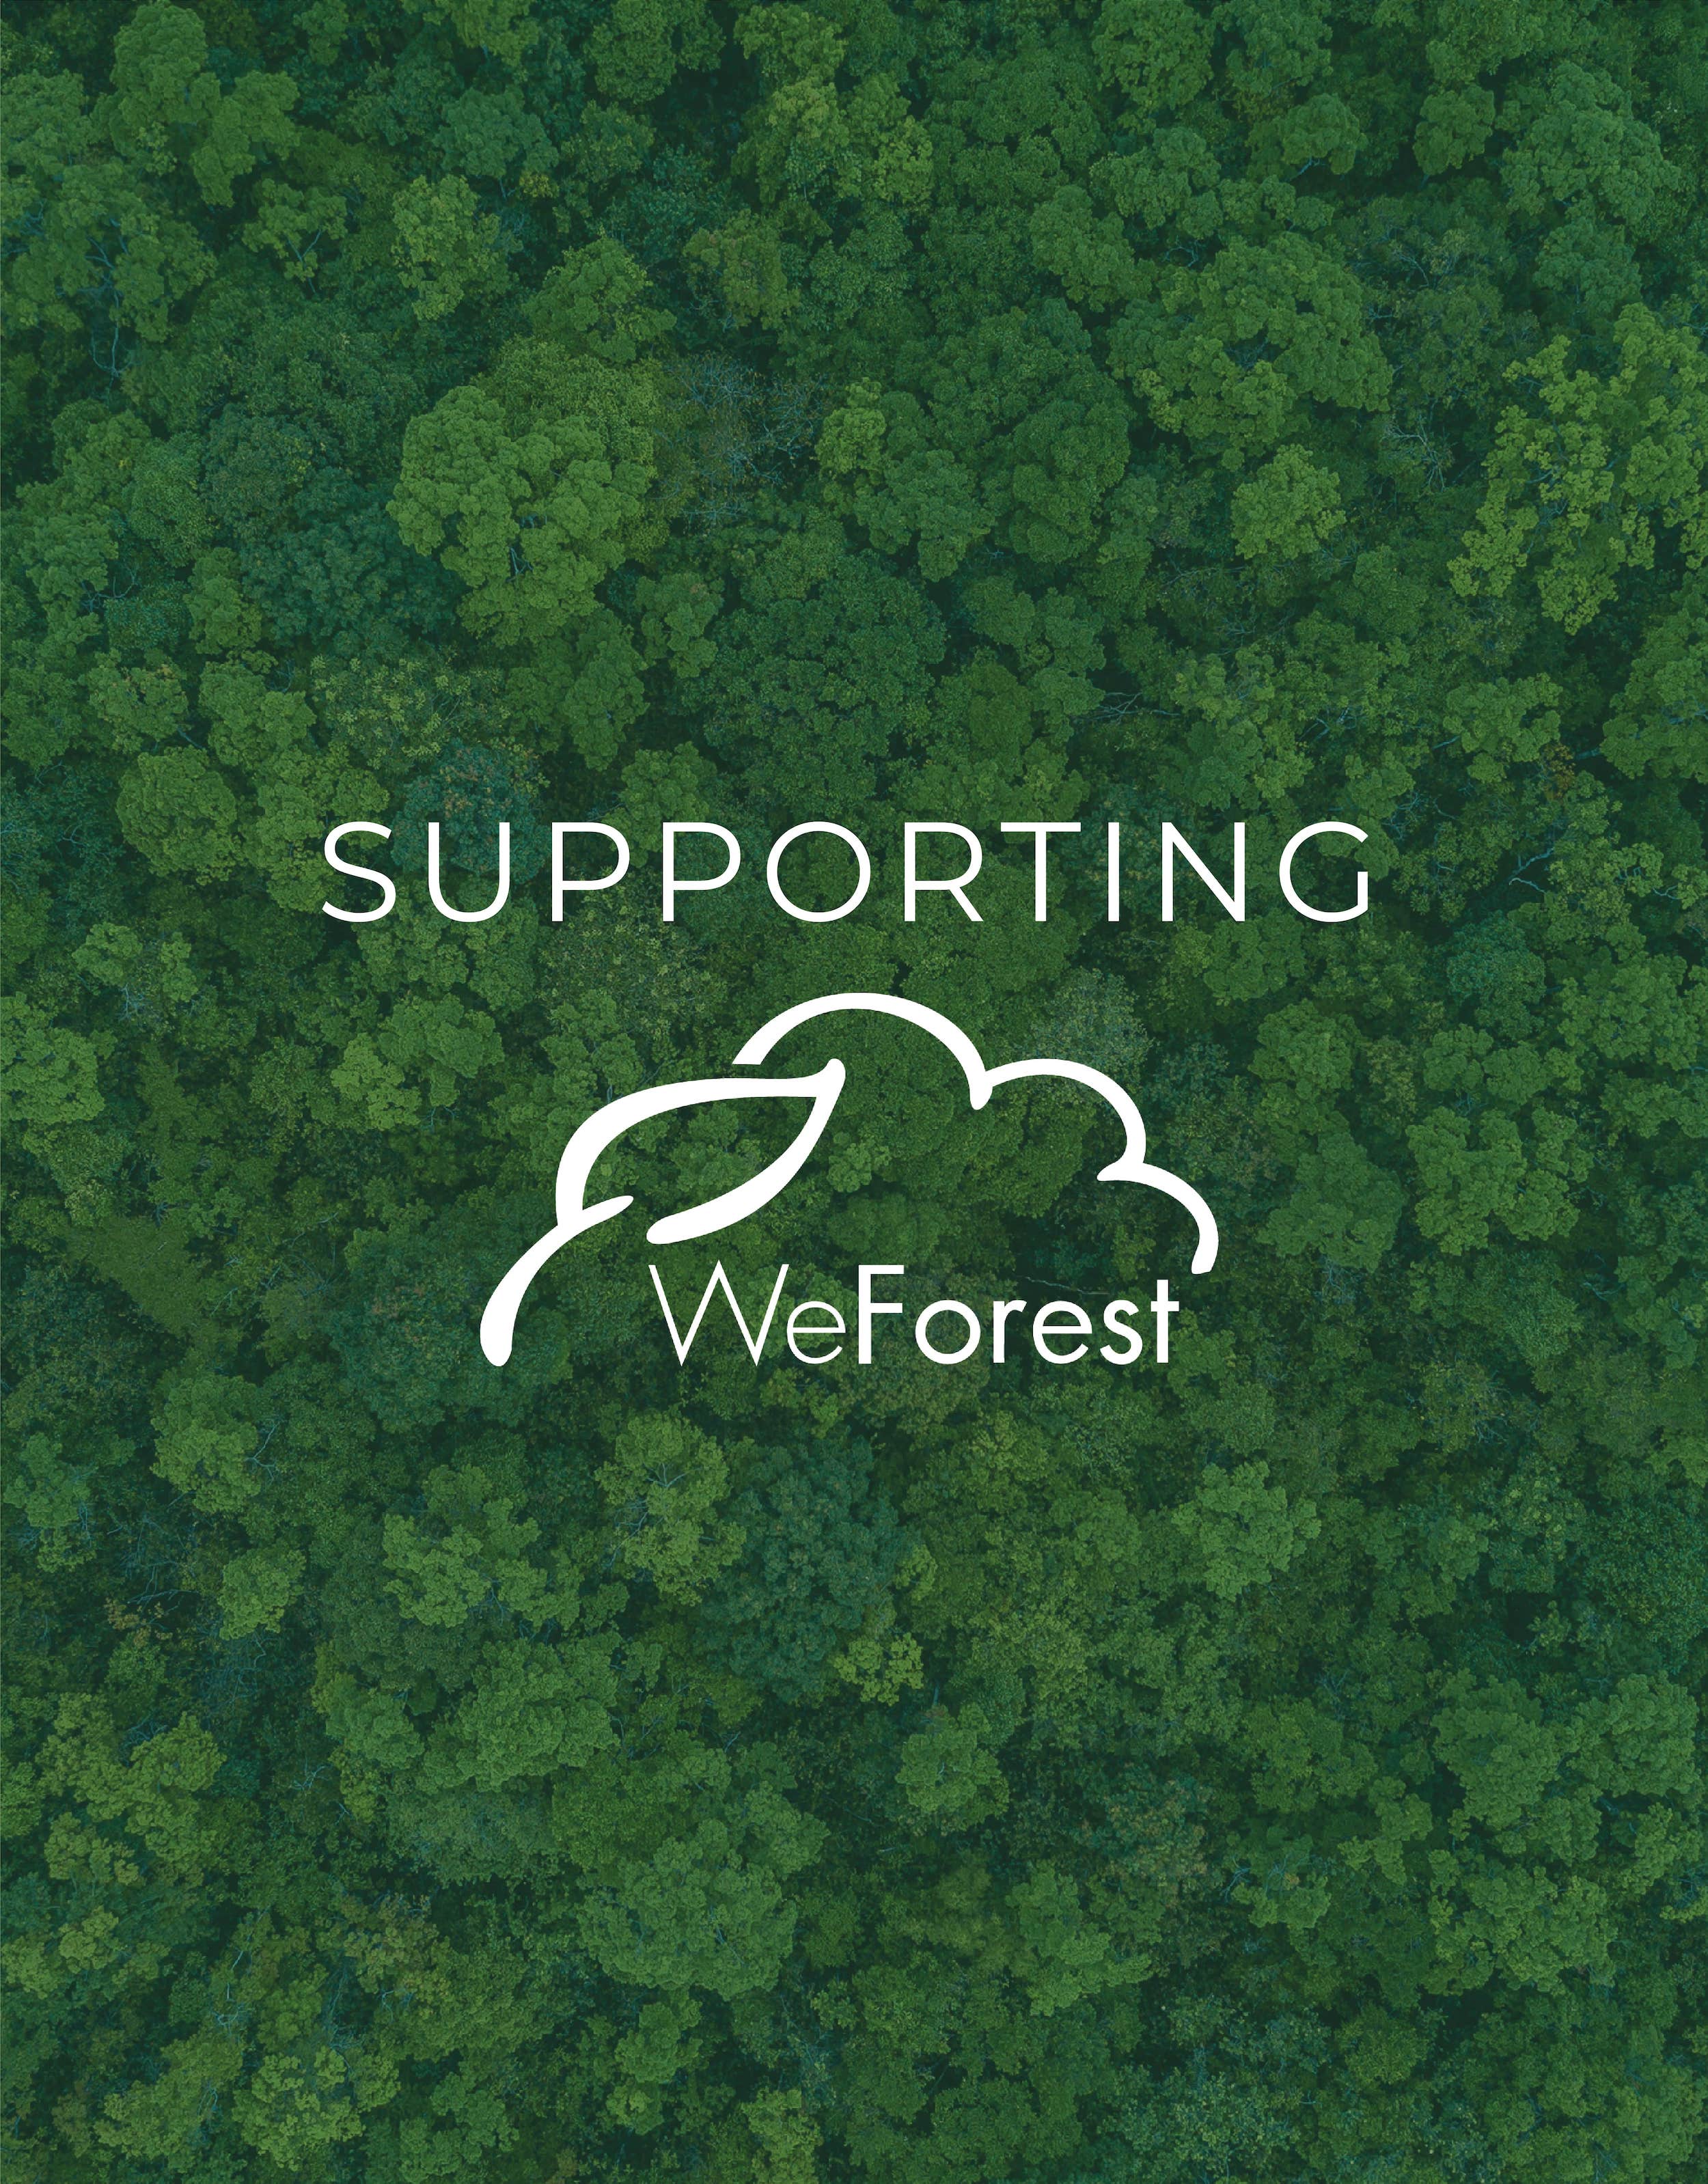 Supporting_WeForest-02-min.jpg